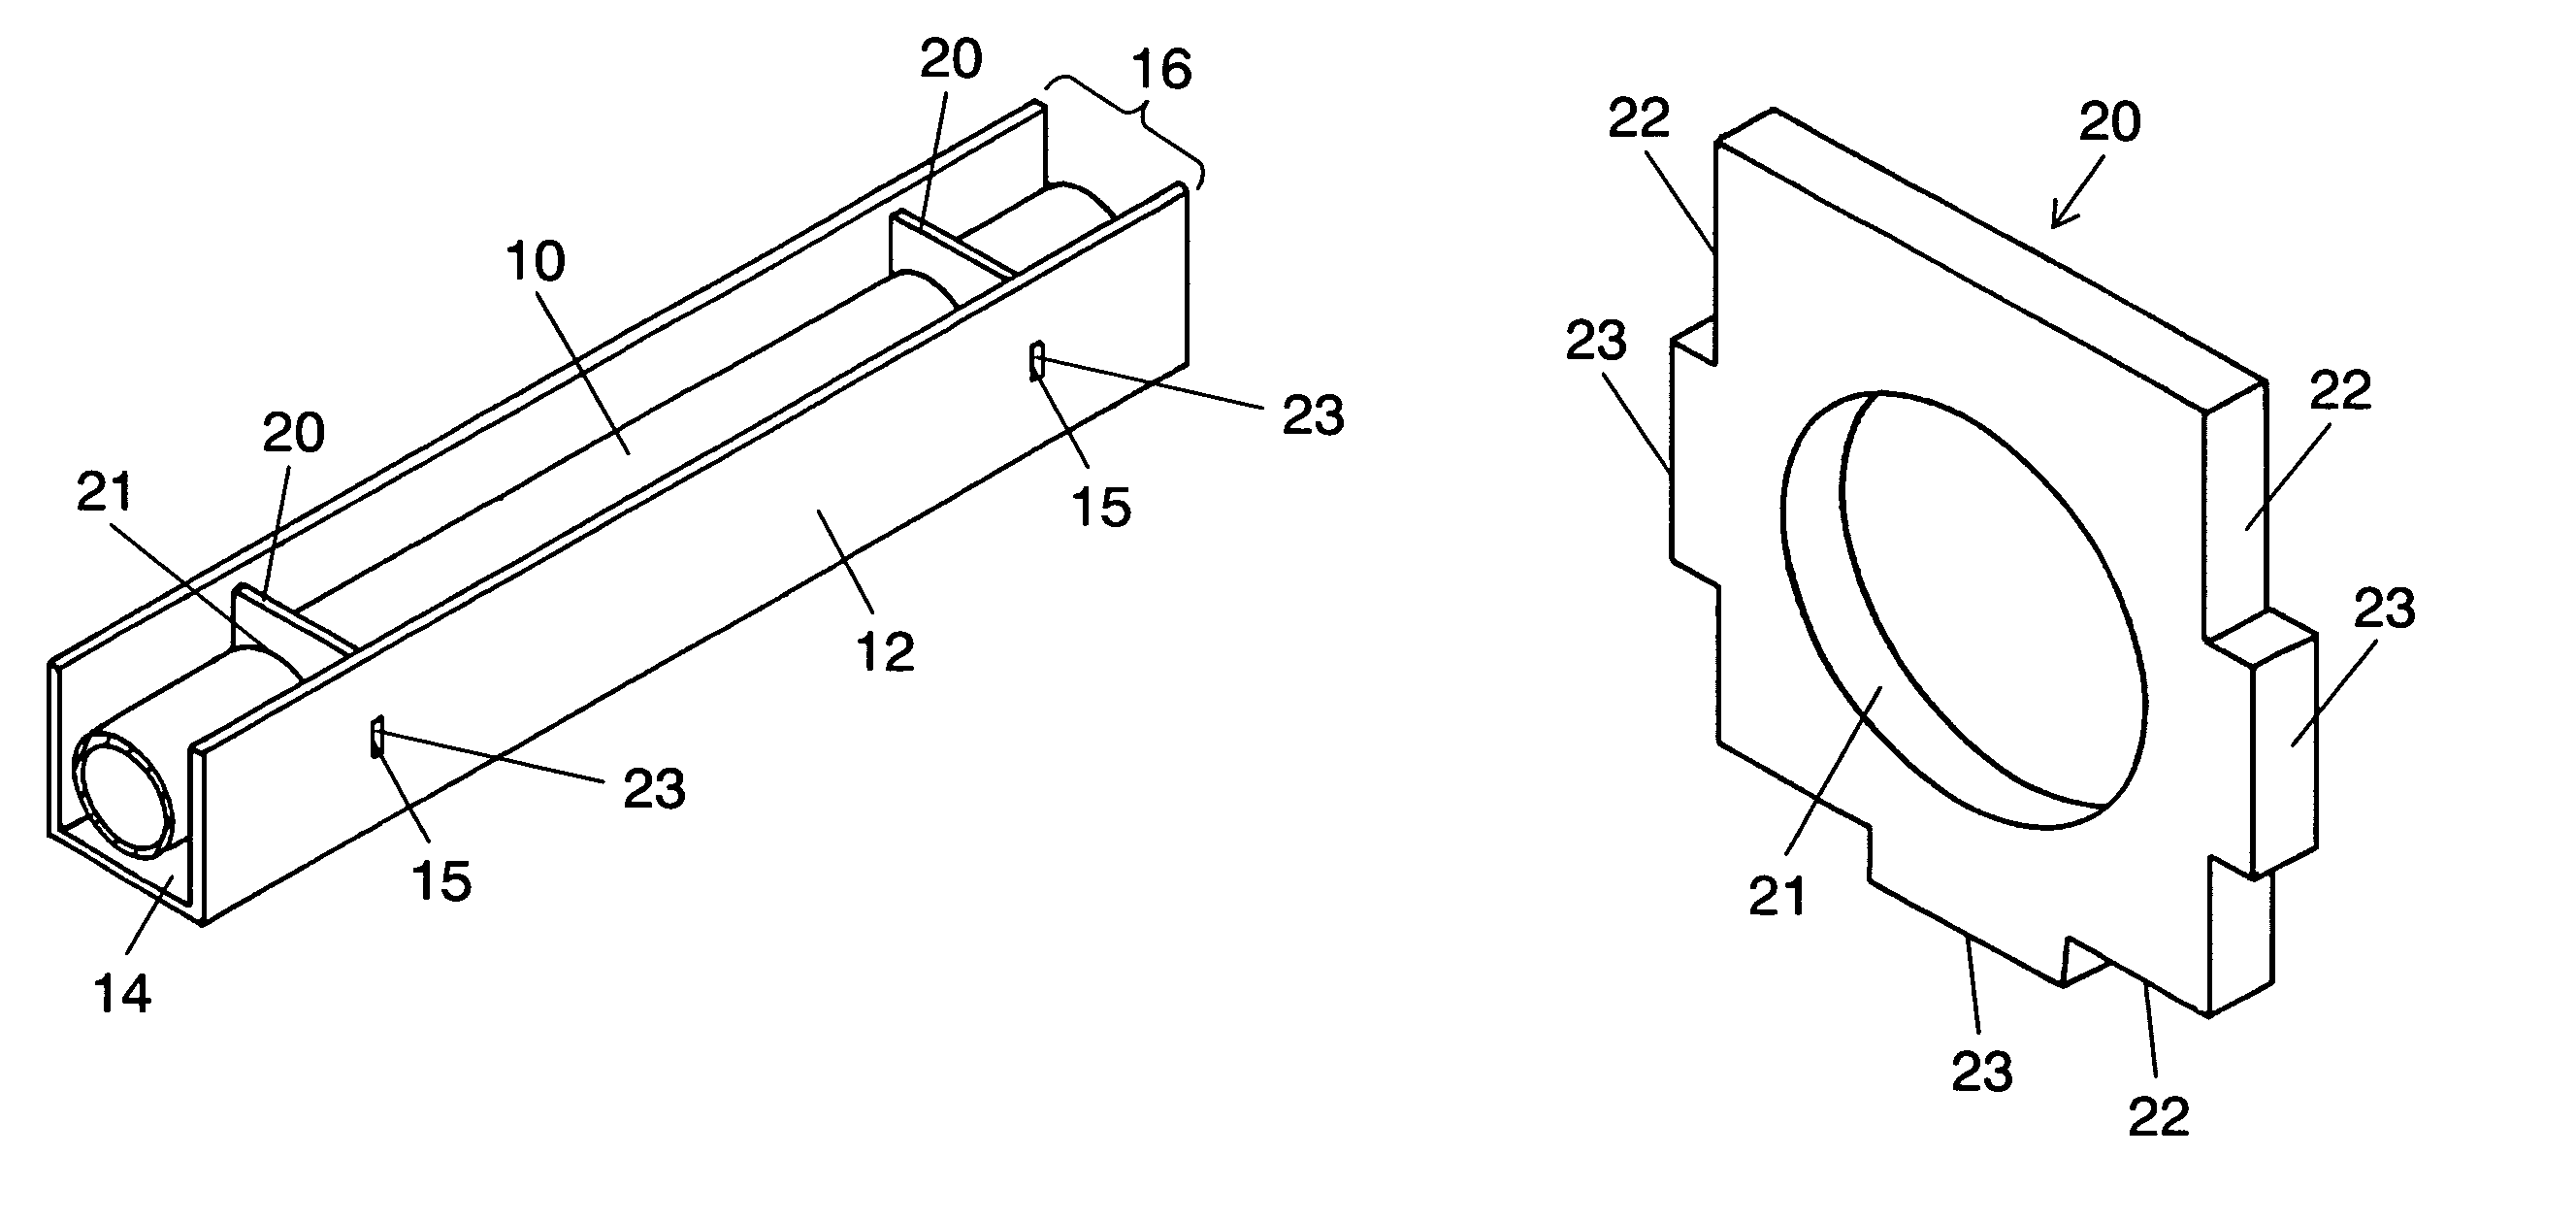 Discharge lamp device including an airtight container filled with a noble gas